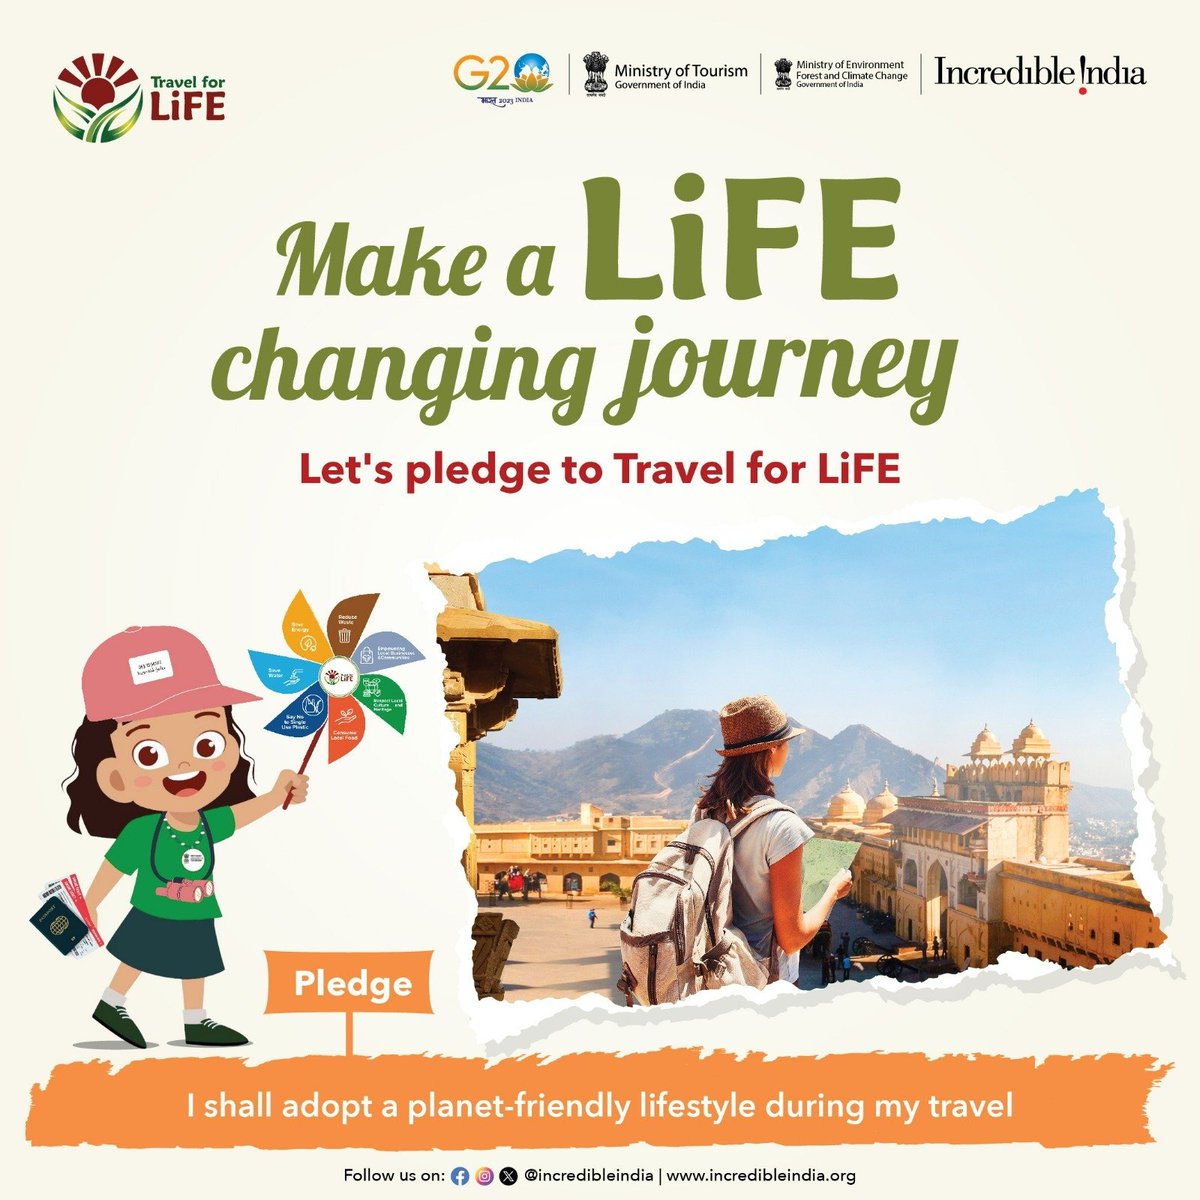 In alignment with #MissionLiFE, let us commit to the '#TravelForLife' pledge - 'I shall adopt a planet-friendly lifestyle during my travel'. Join us on this transformative journey. 
#SutainableTourism #Pledge1